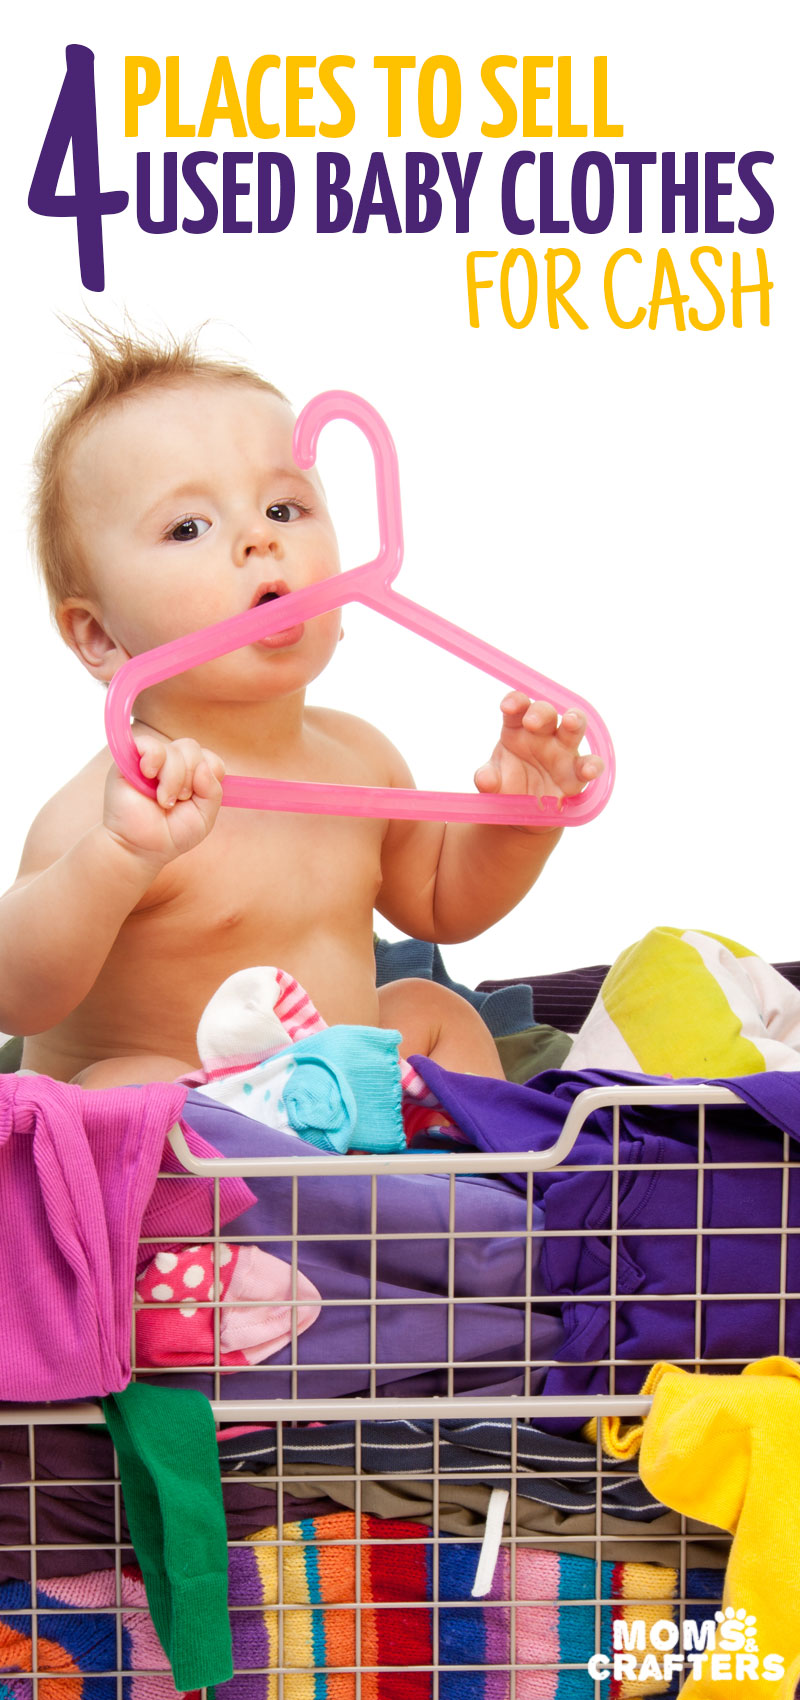 places that buy used baby stuff near me